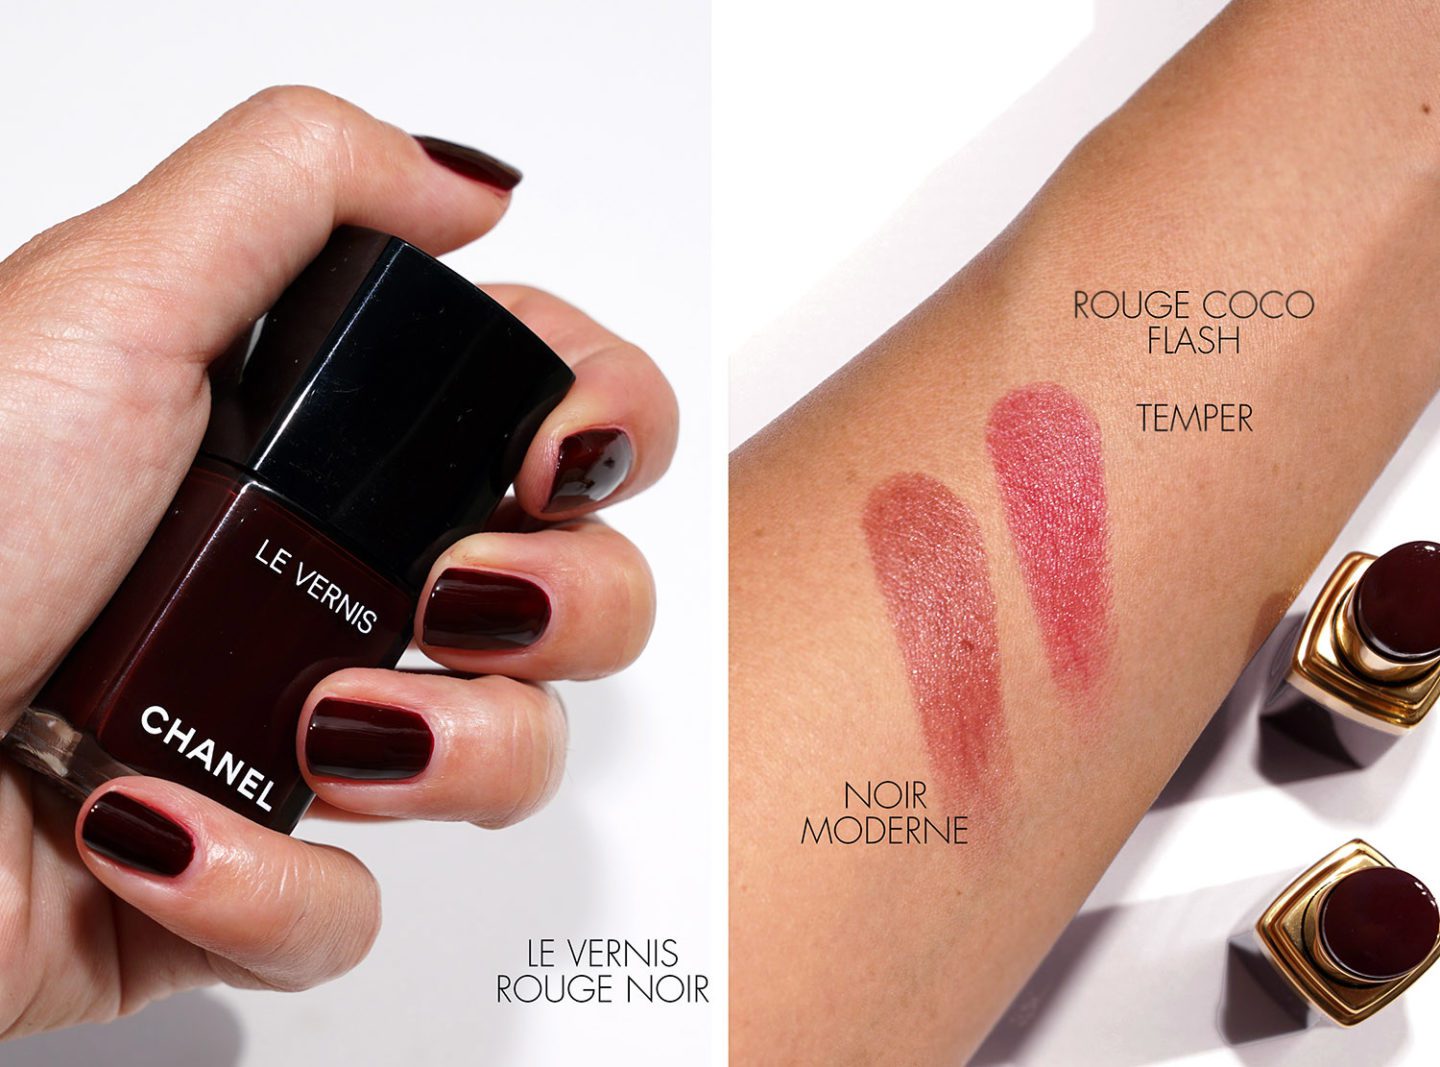 Chanel Le Vernis in Rouge Noir and Rouge Coco Flash Noir Moderne